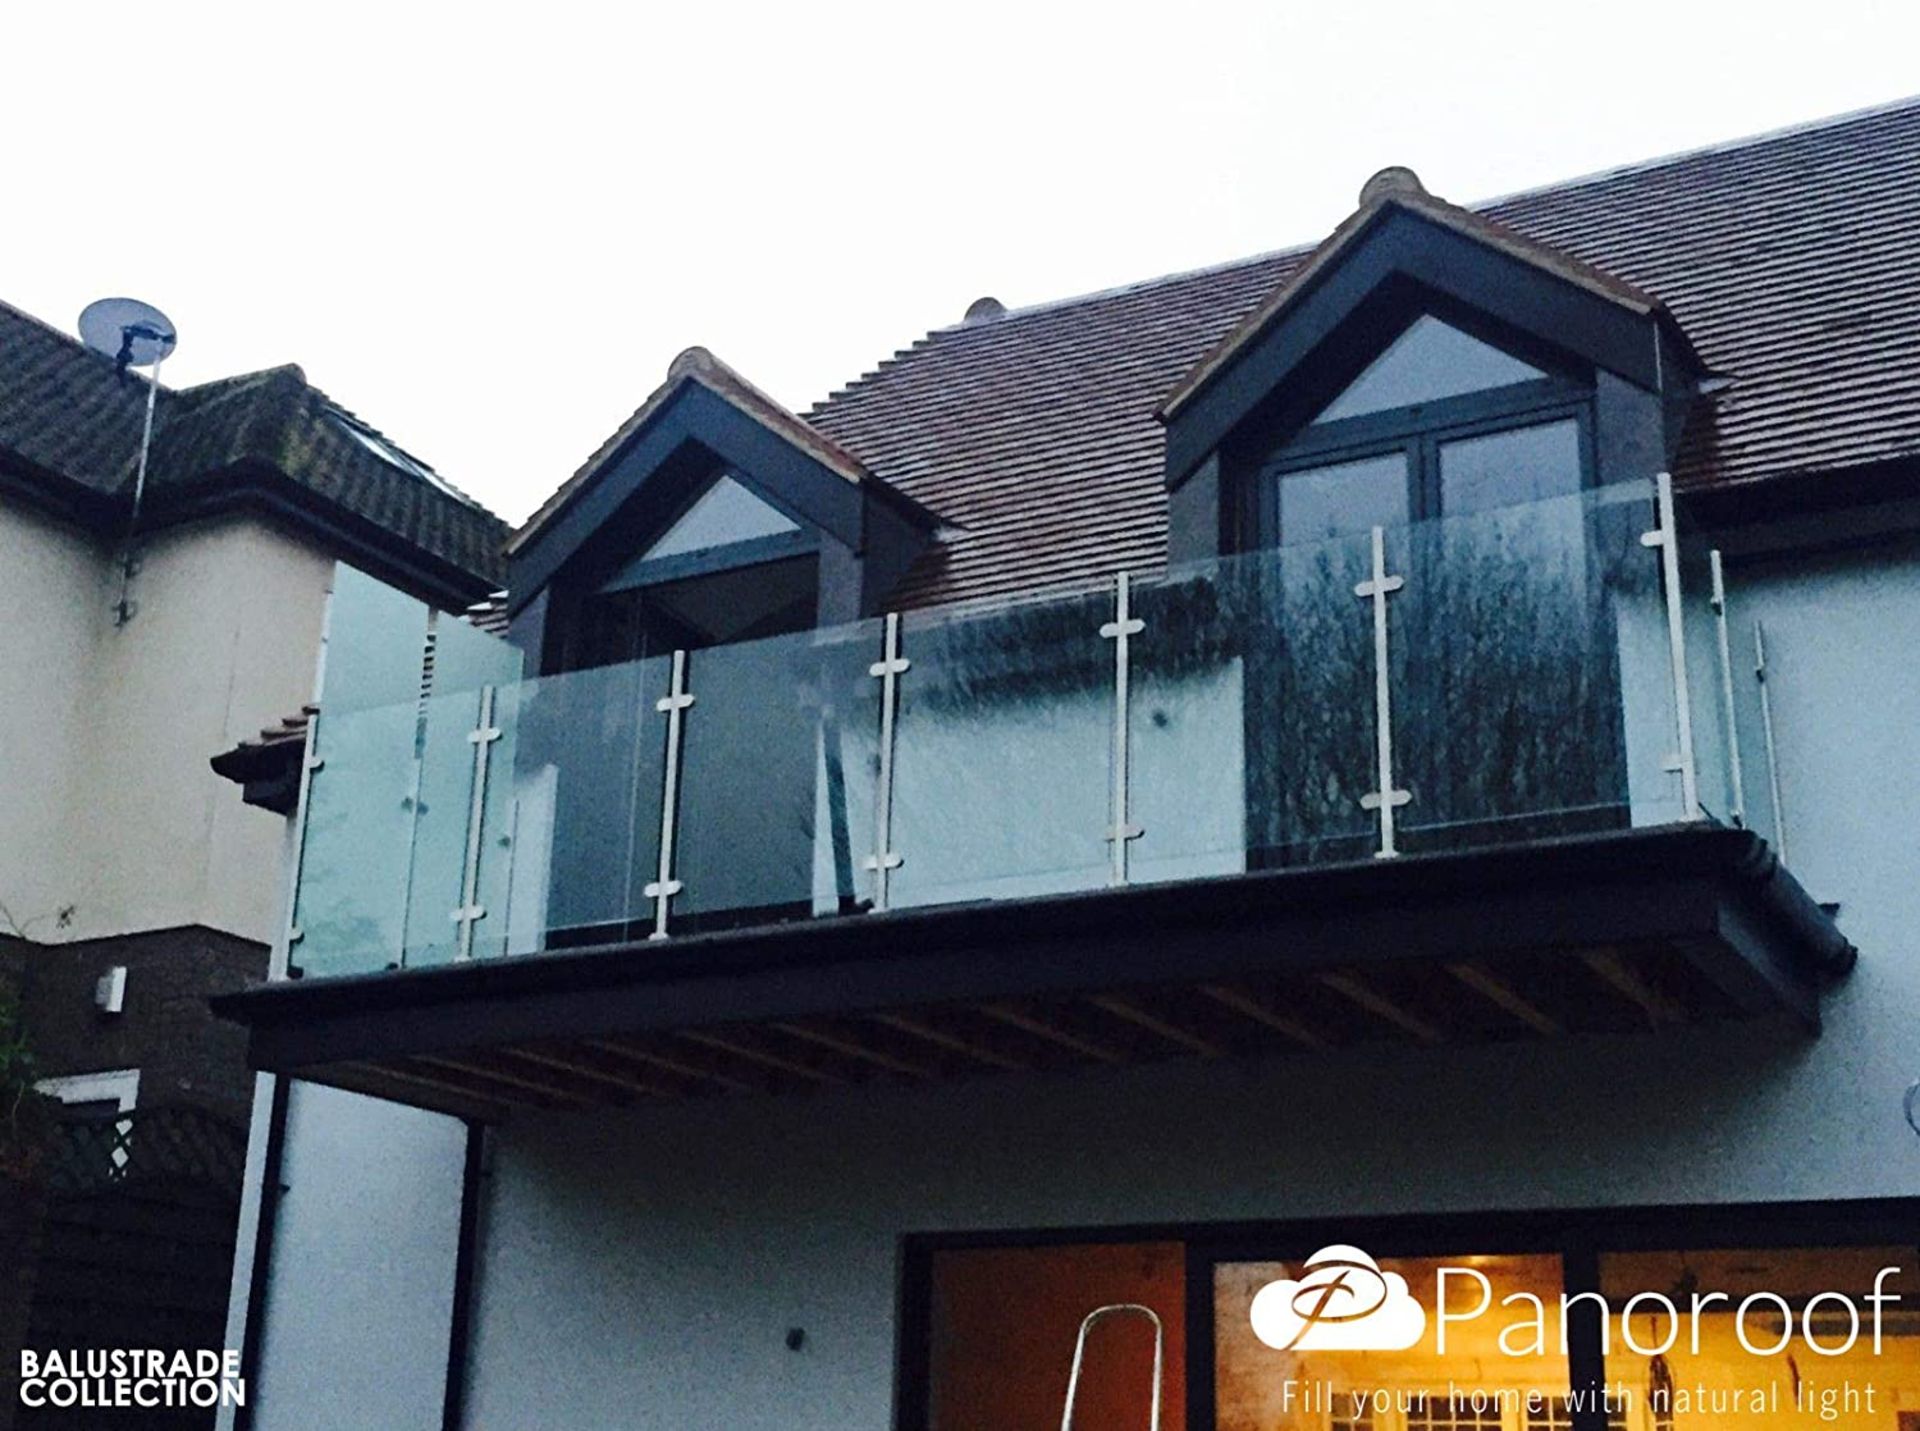 Panoroof Balustrade 10mm Toughened Glass with Stainless Steel Poles + Clamps. Measurements: